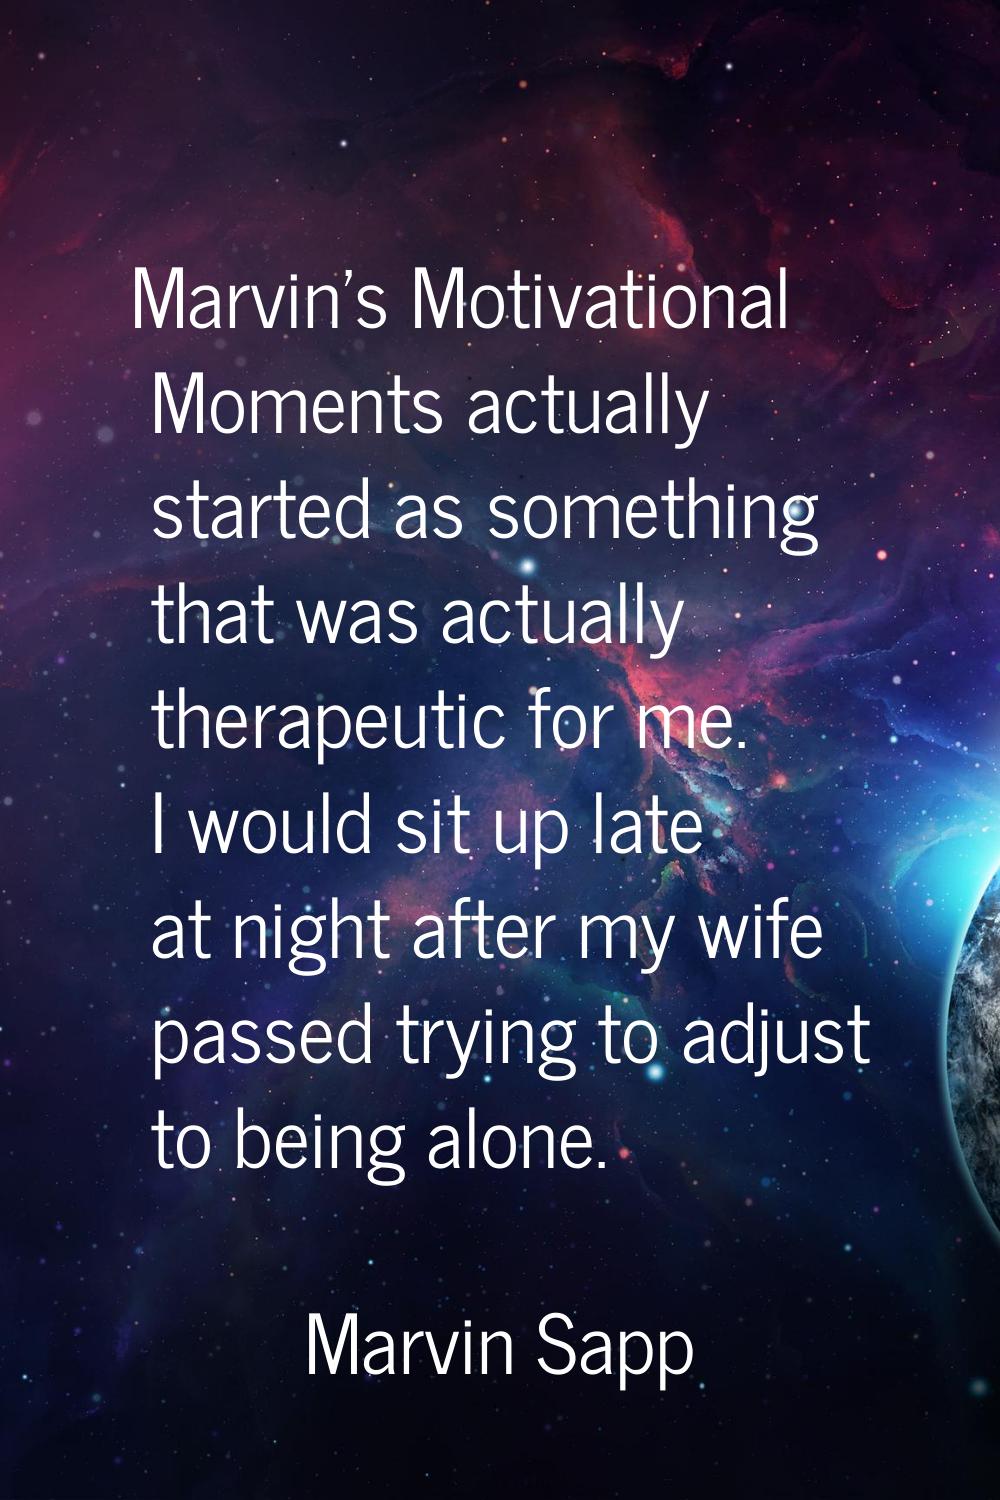 Marvin's Motivational Moments actually started as something that was actually therapeutic for me. I